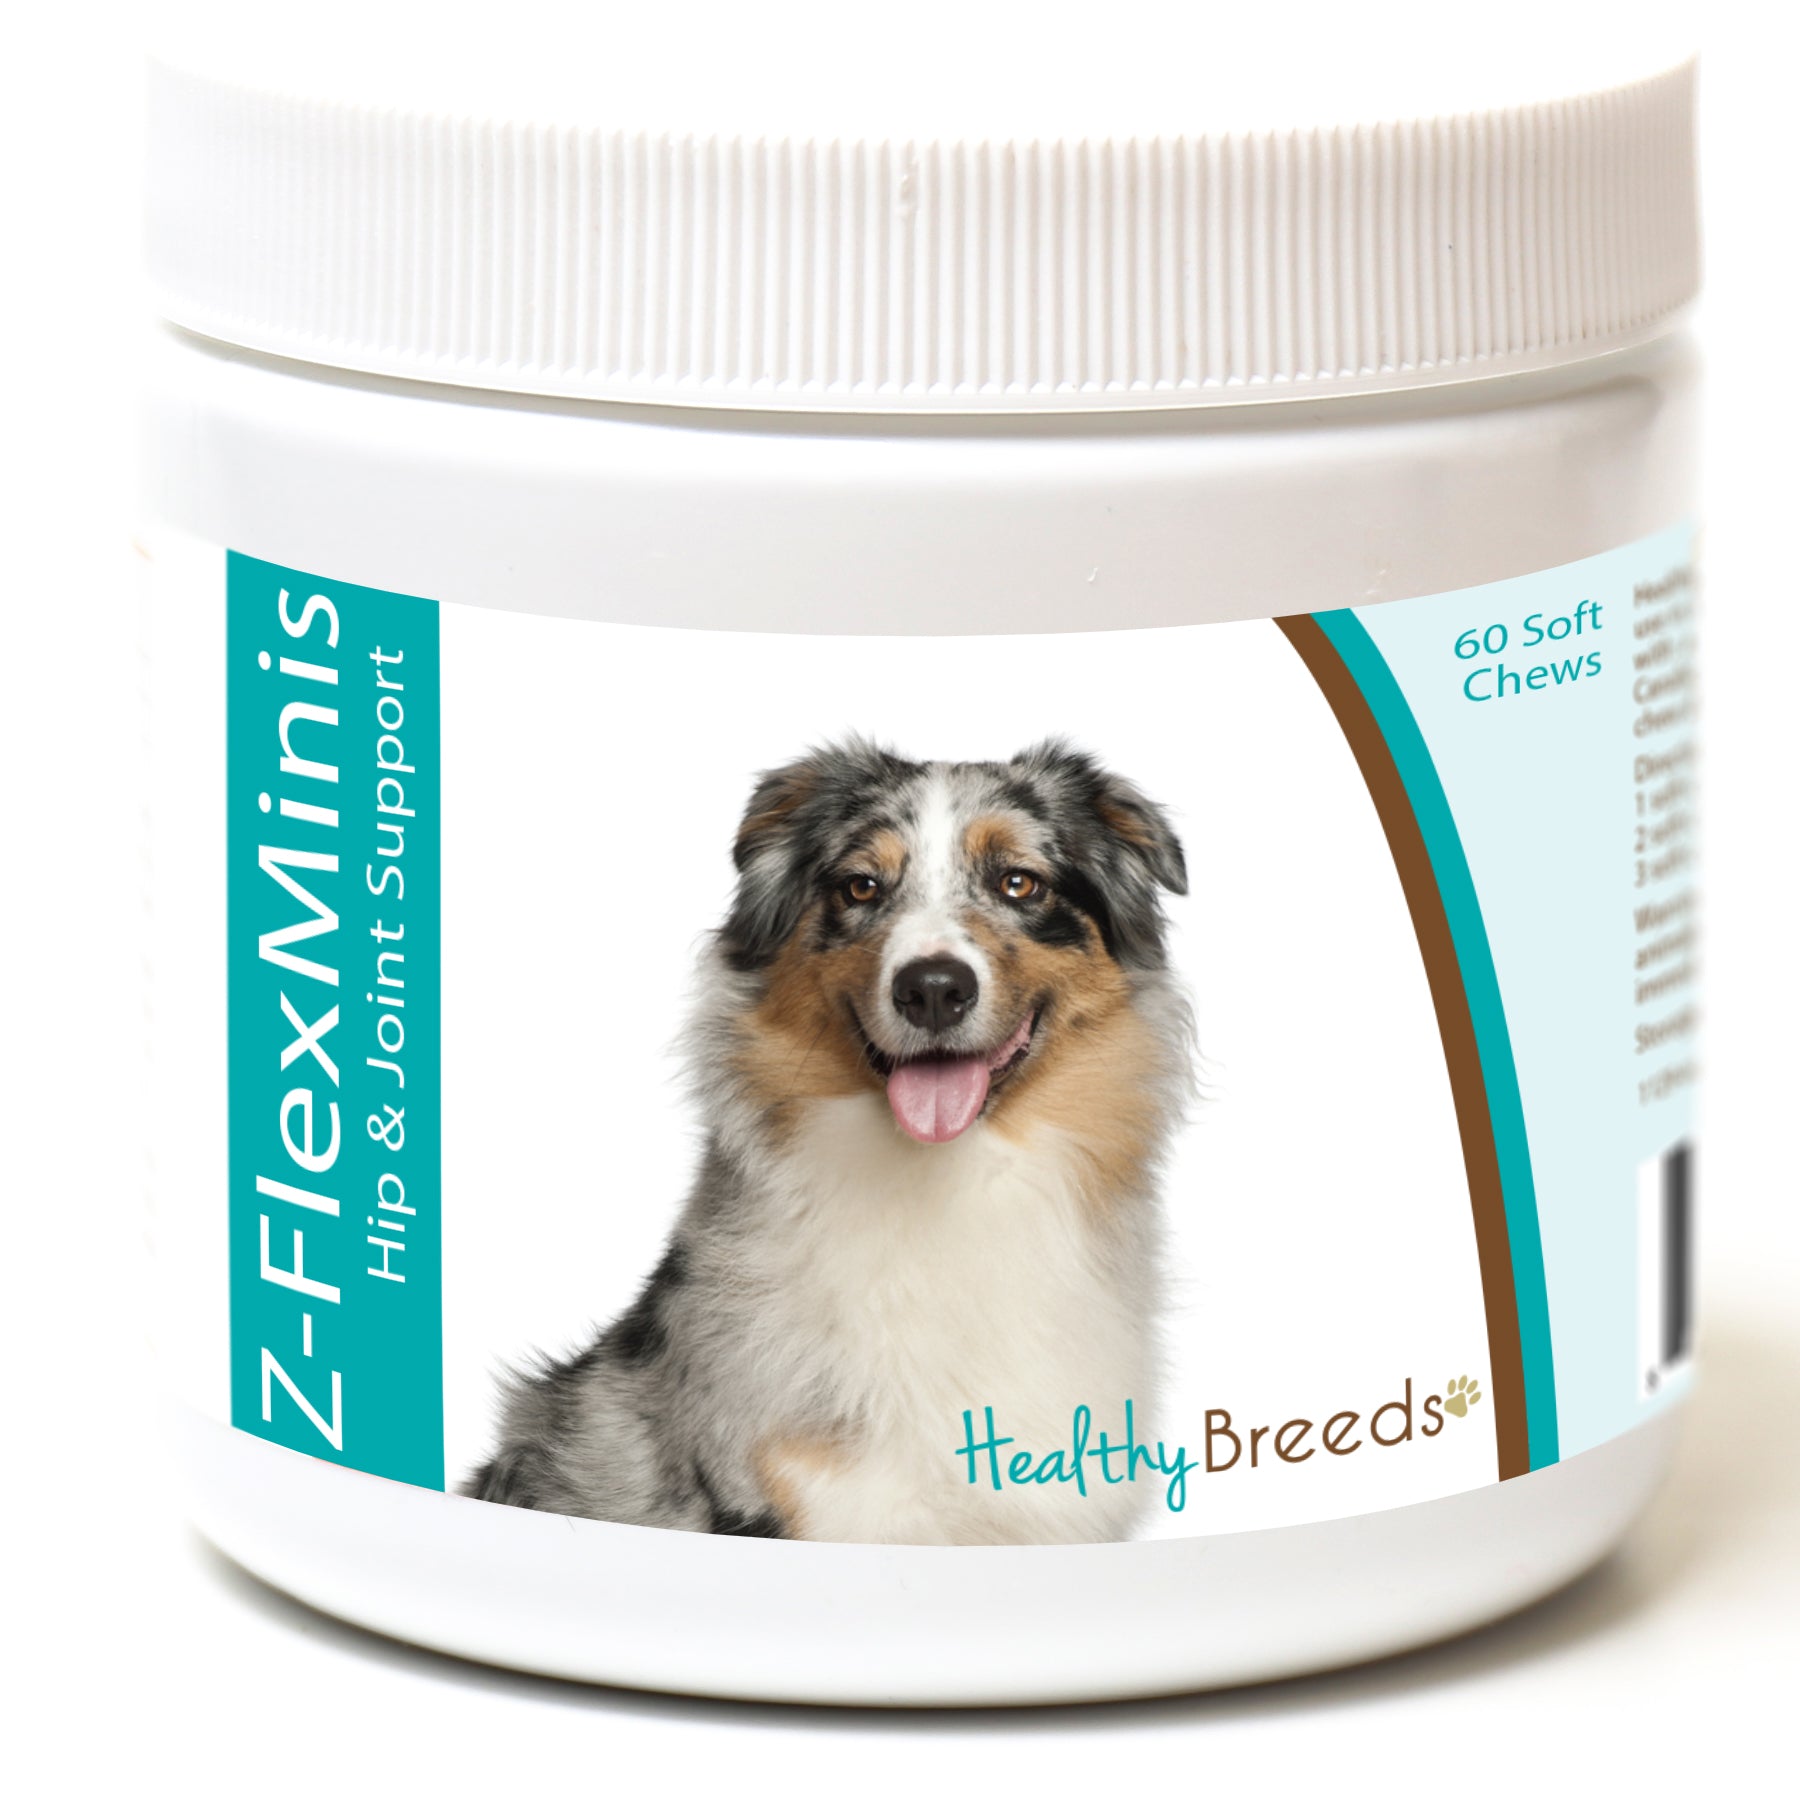 Healthy Breeds Australian Shepherd Z-Flex Minis Hip and Joint Support Soft Chews 60 Count